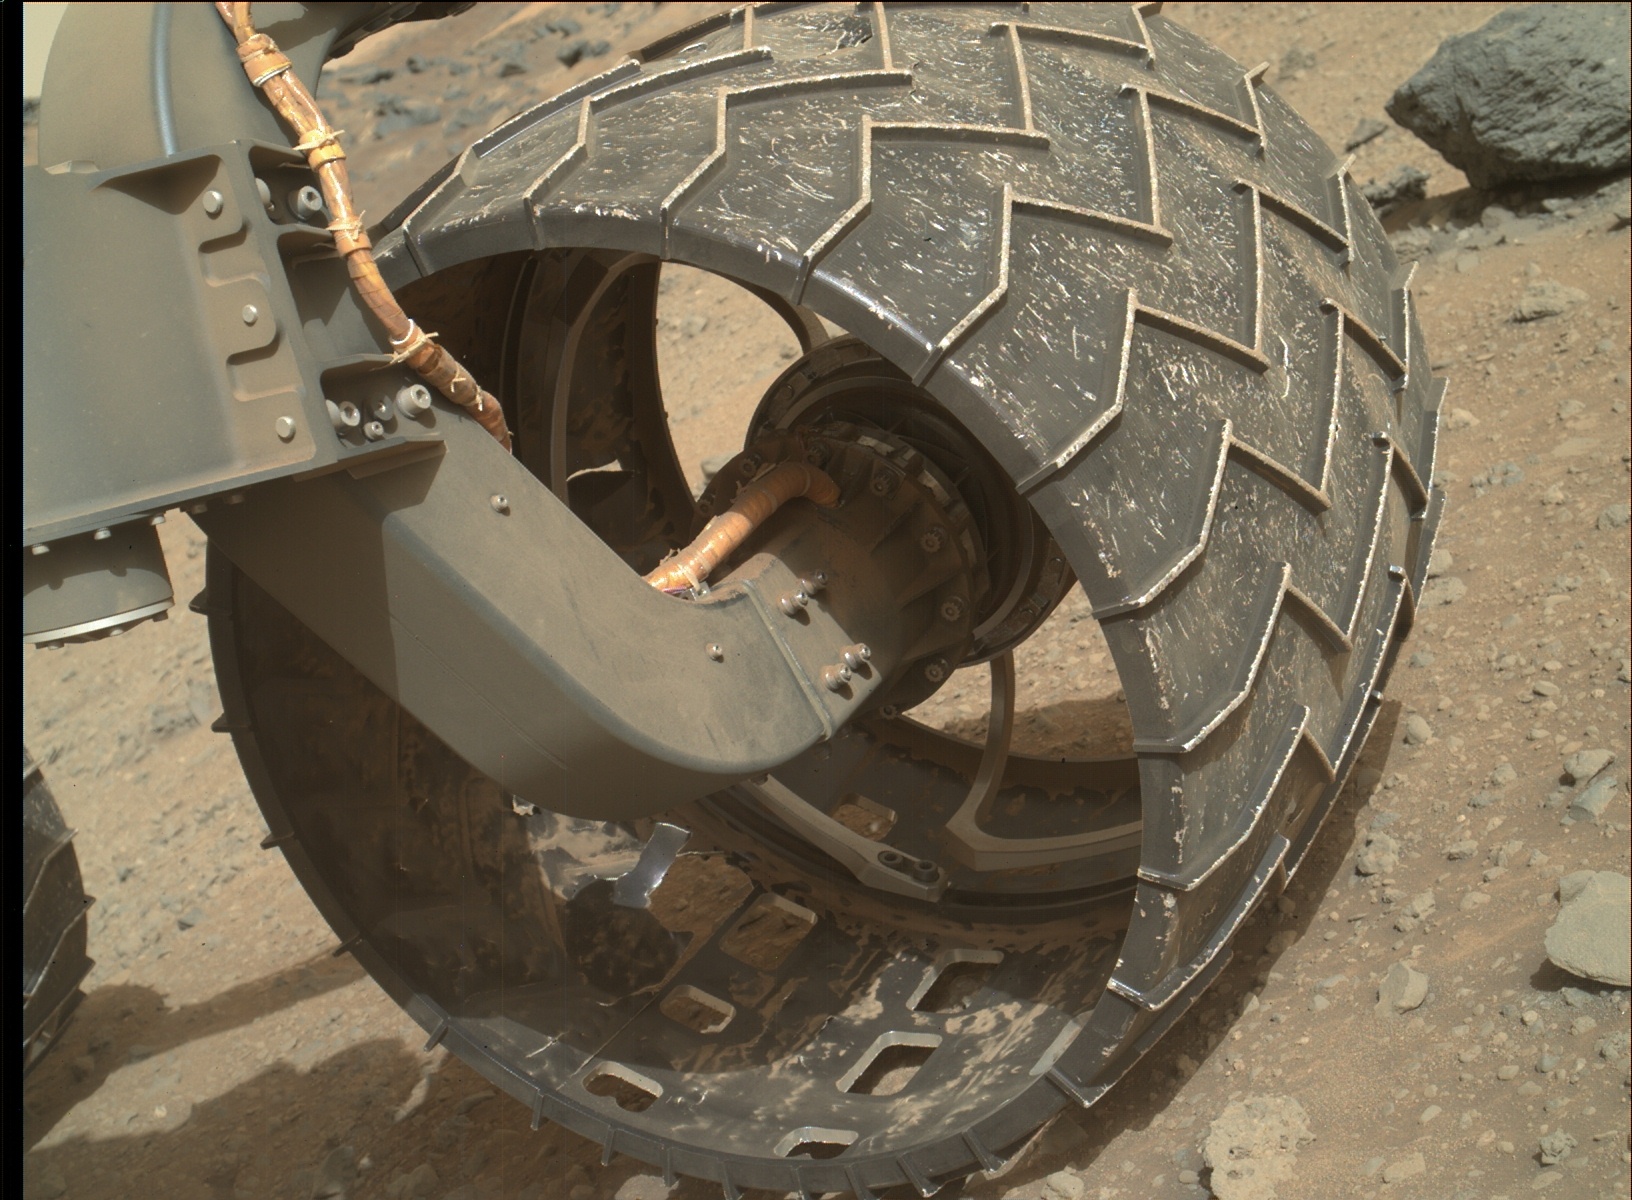 Nasa's Mars rover Curiosity acquired this image using its Mars Hand Lens Imager (MAHLI) on Sol 955